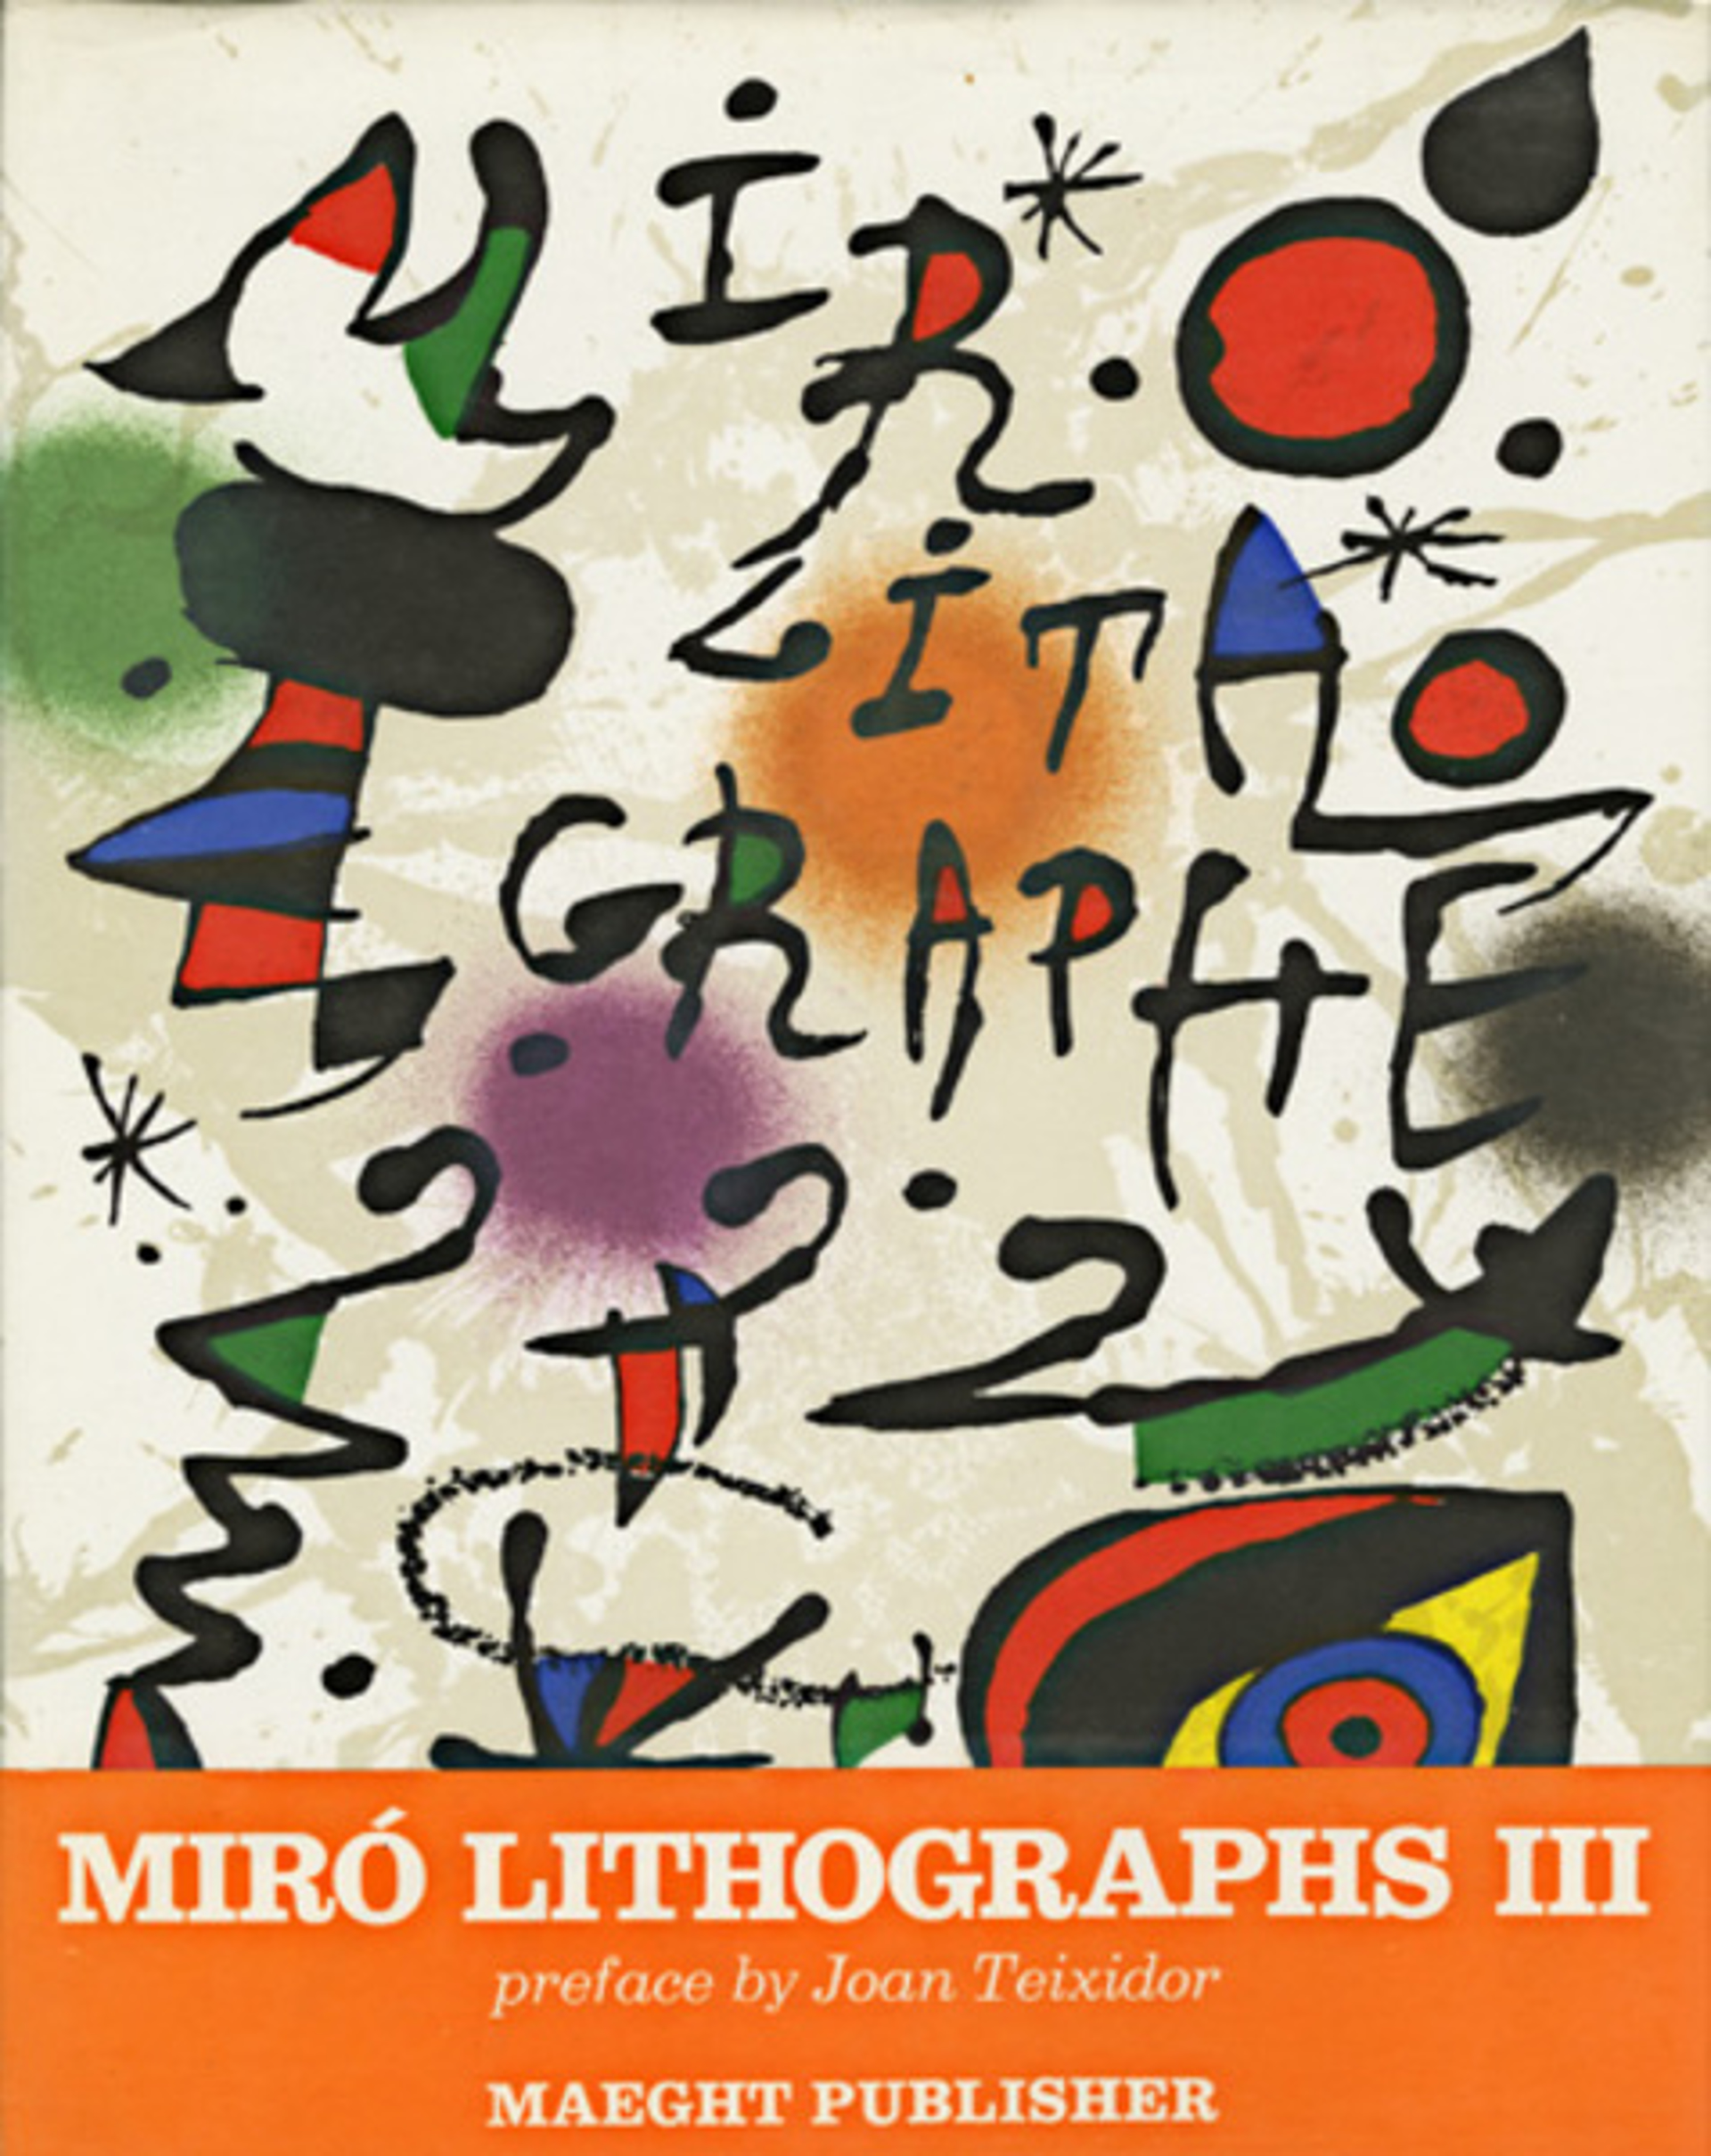 Lithography, Volume 3 1964-1969 contains 6 original lithos, Ed. of 5M copies by Joan Miró